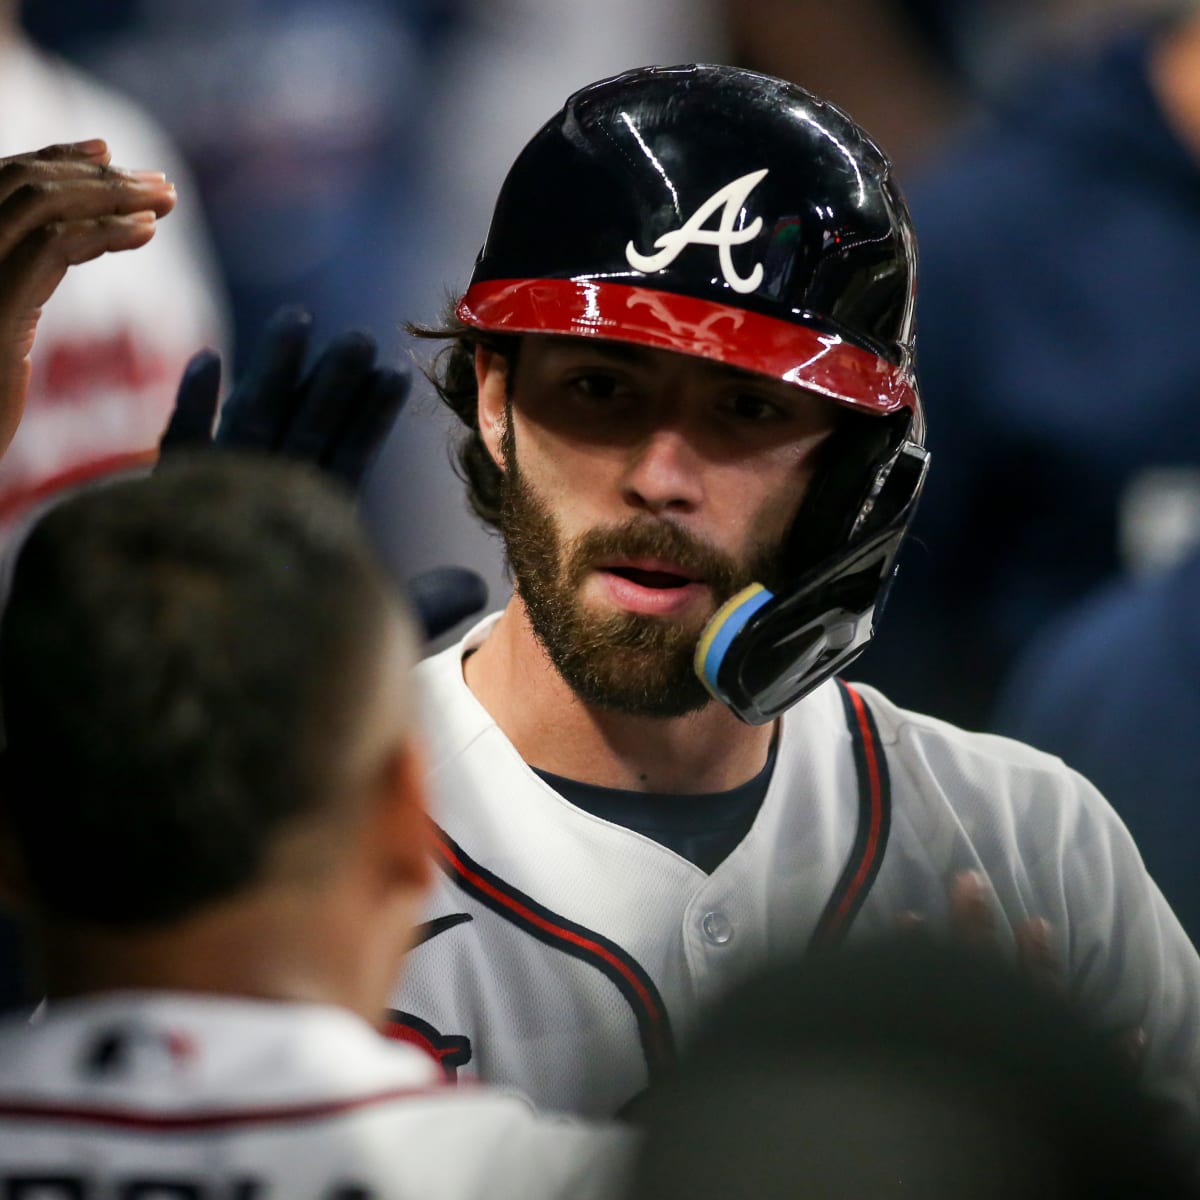 Then there was 1: What Dansby Swanson's free agency means for the Cubs'  offseason - Chicago Sun-Times